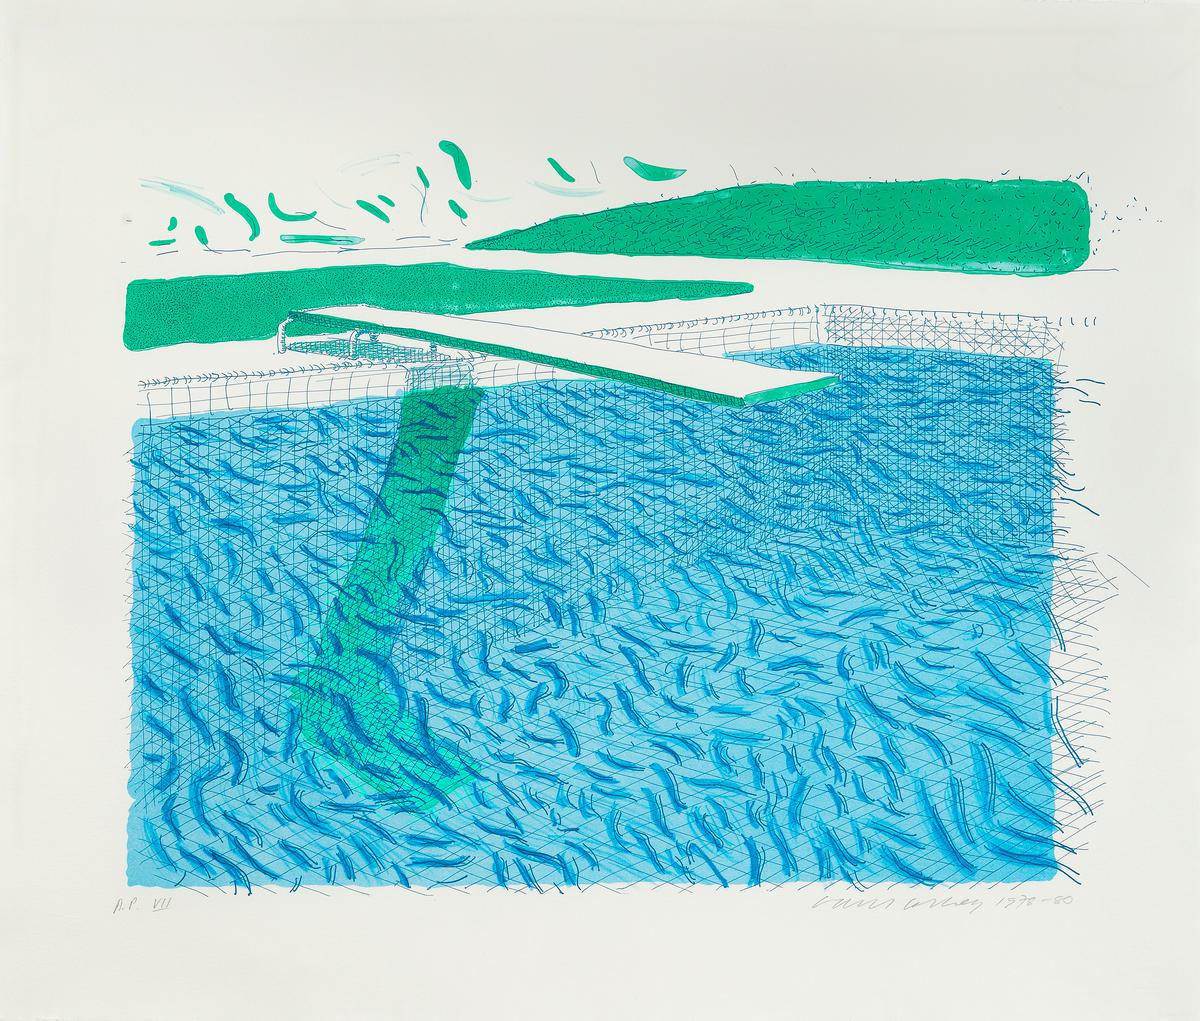 David Hockney Lithographic Water Made of Lines, Crayon, and a Blue Wash, original lithograph for sale